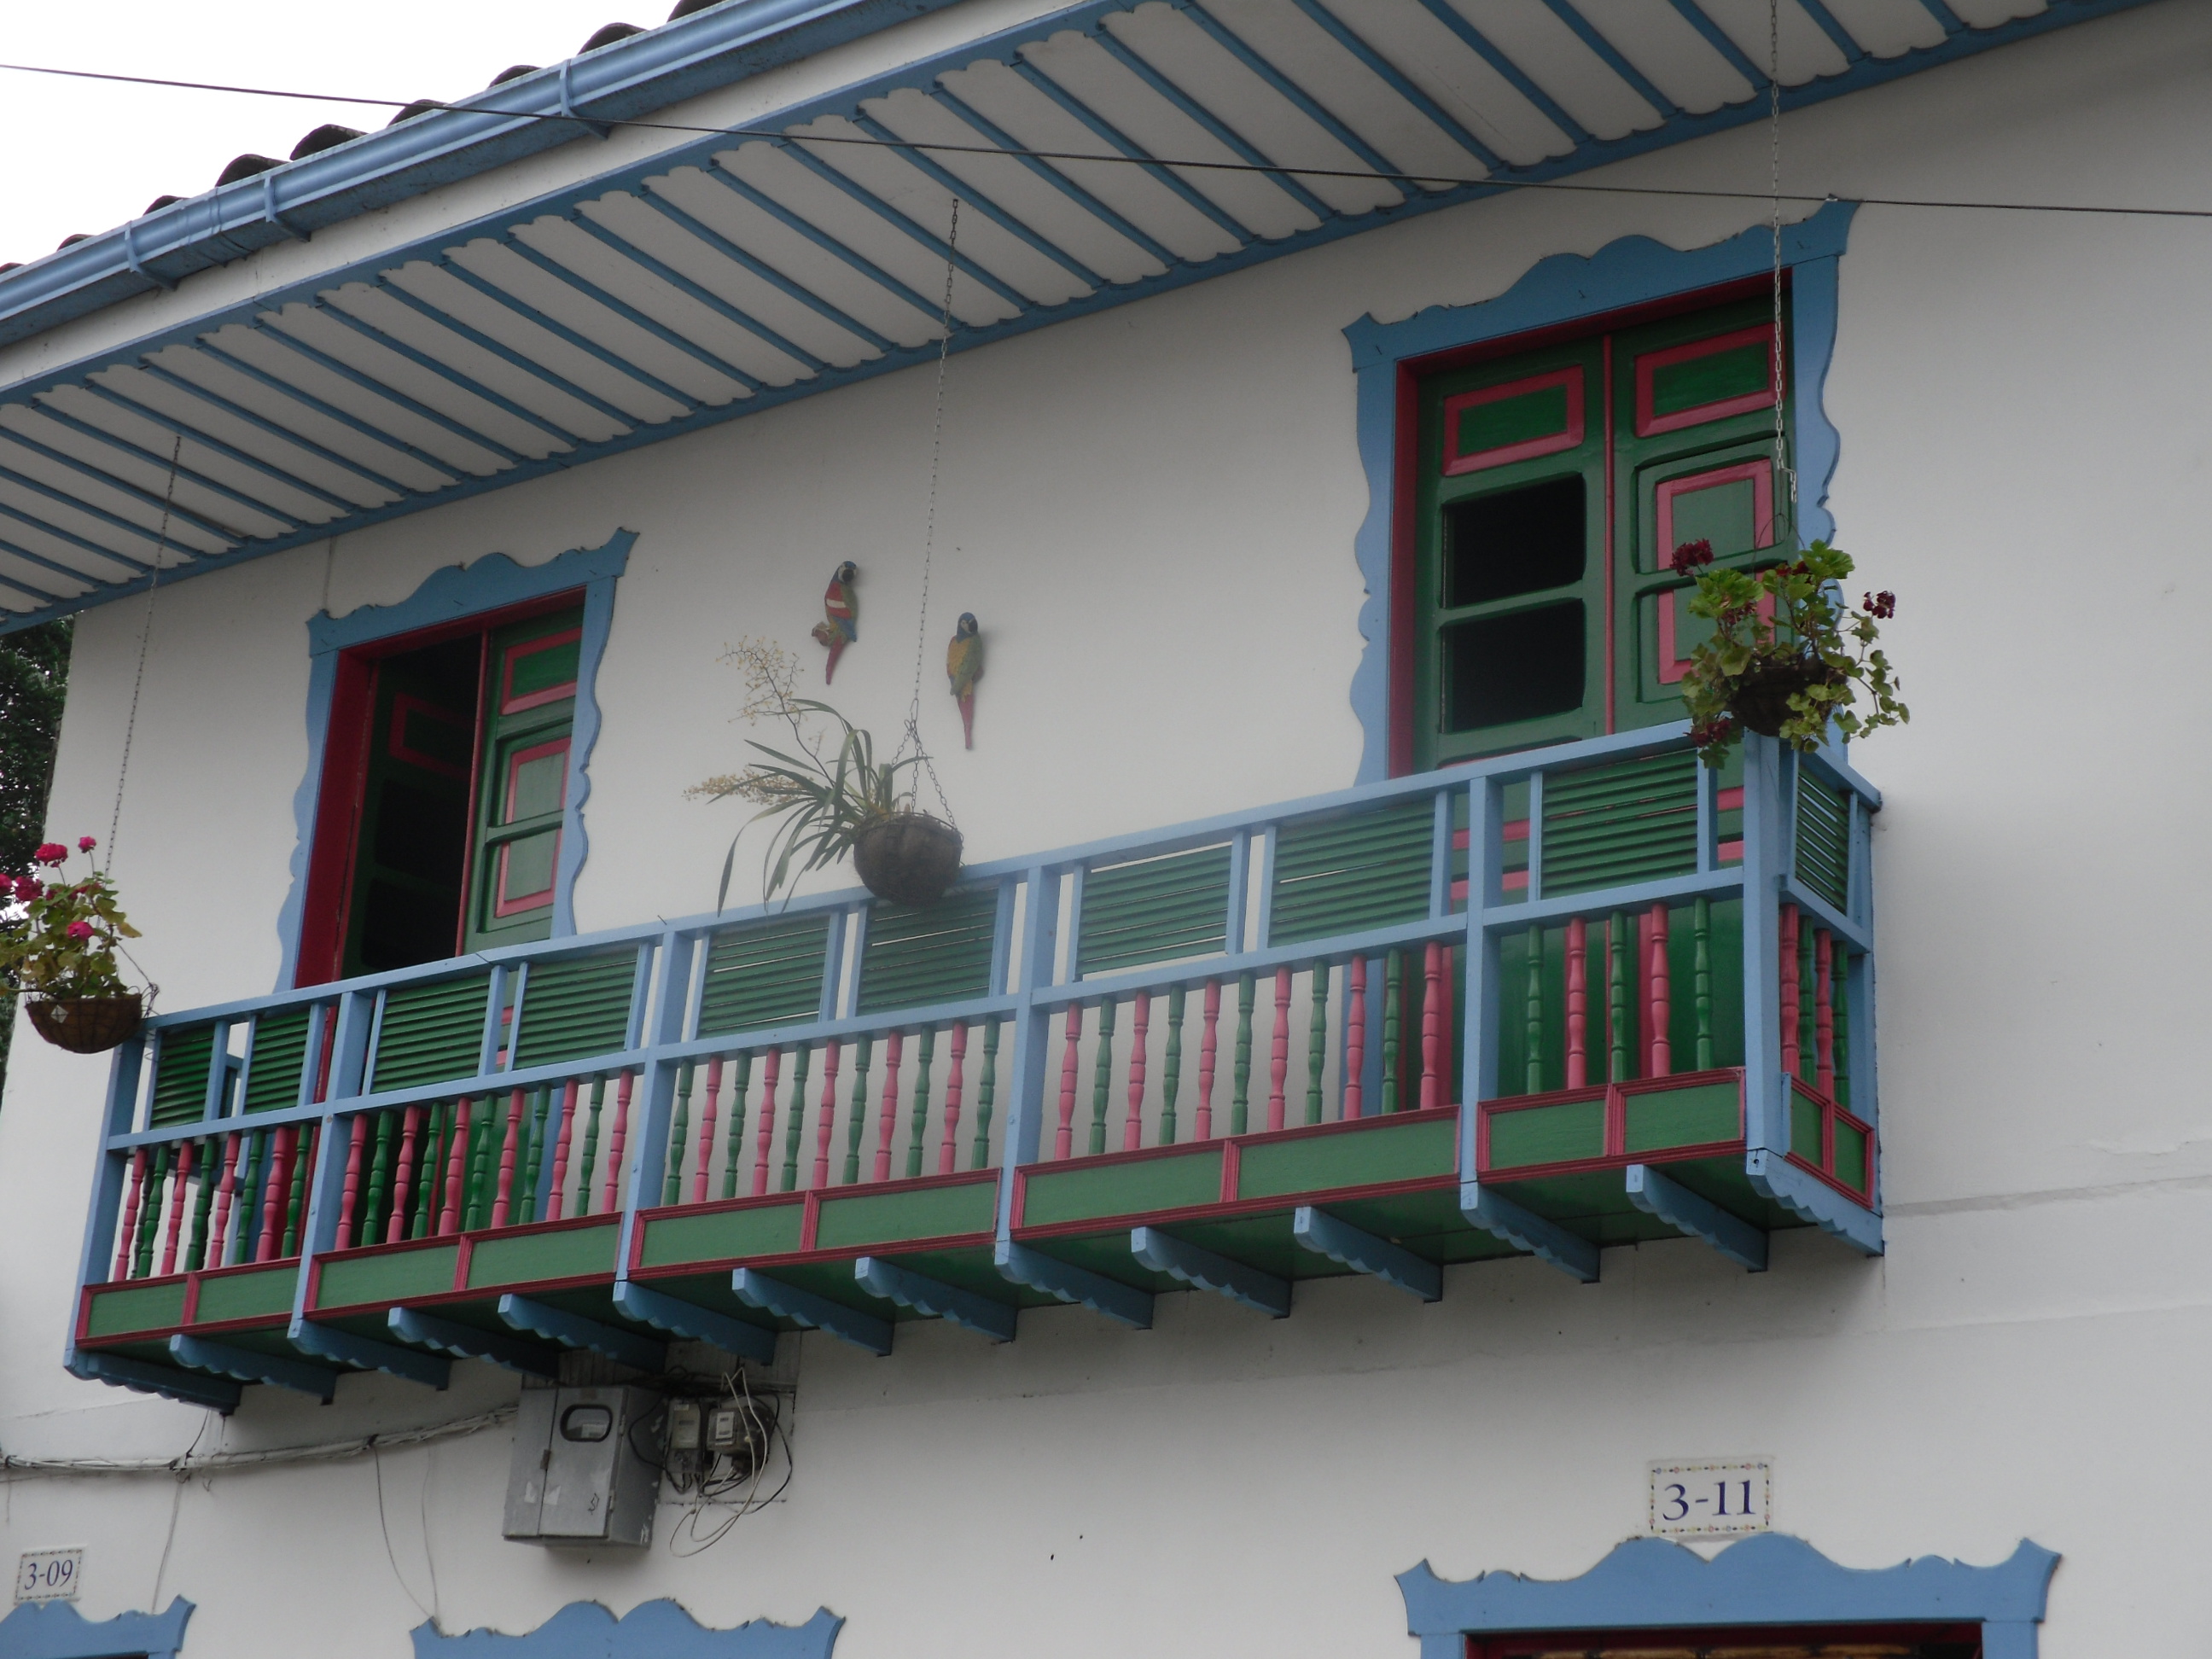 Charming architecture of Colombia's coffee country towns